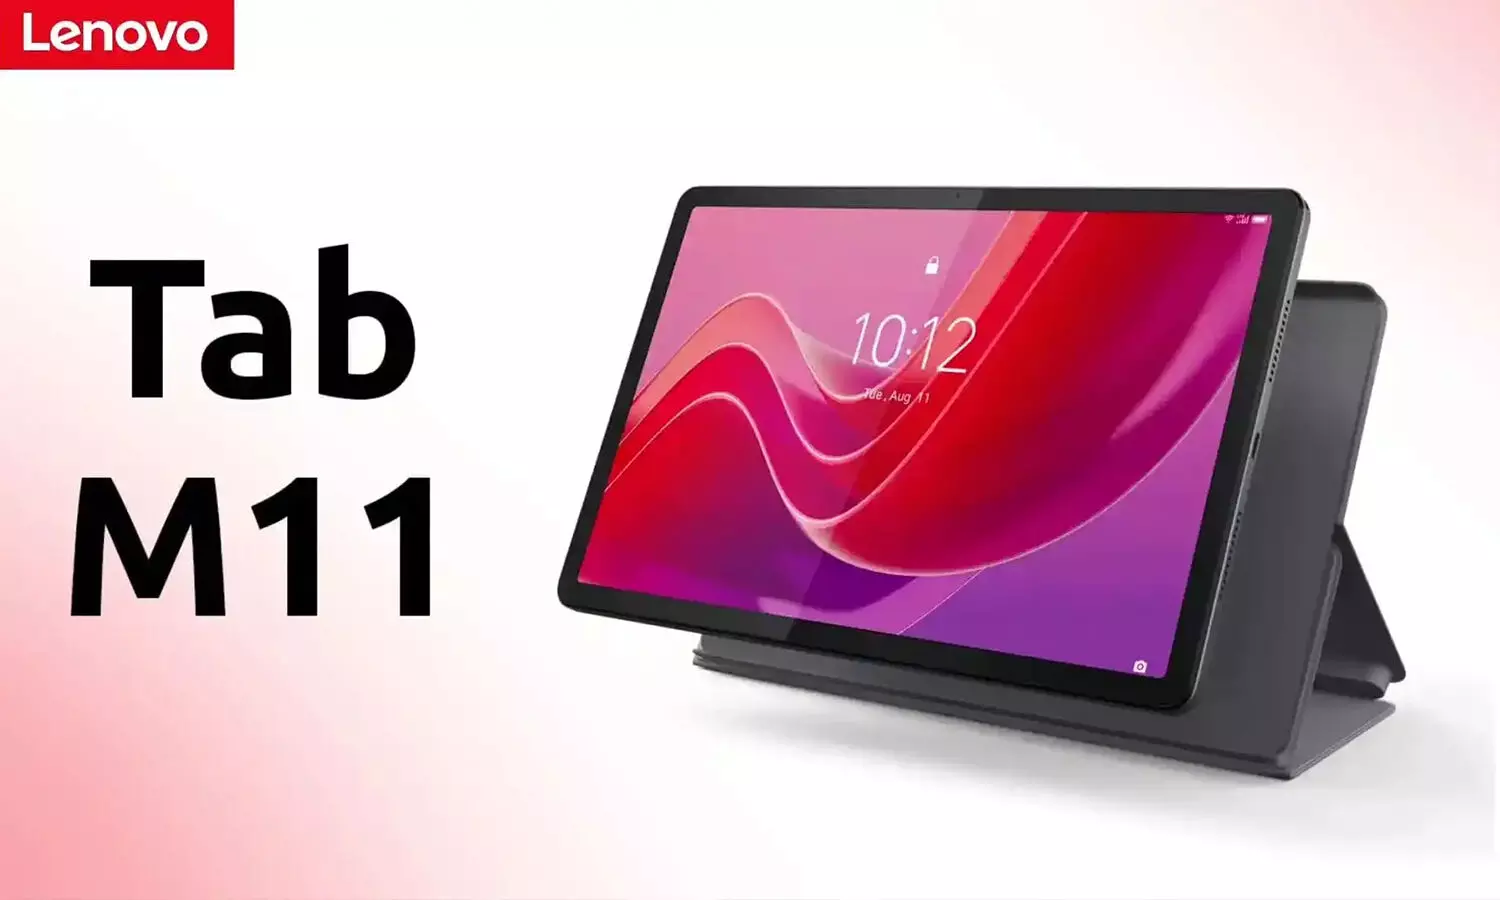 Lenovo Tab M11 Launched in India